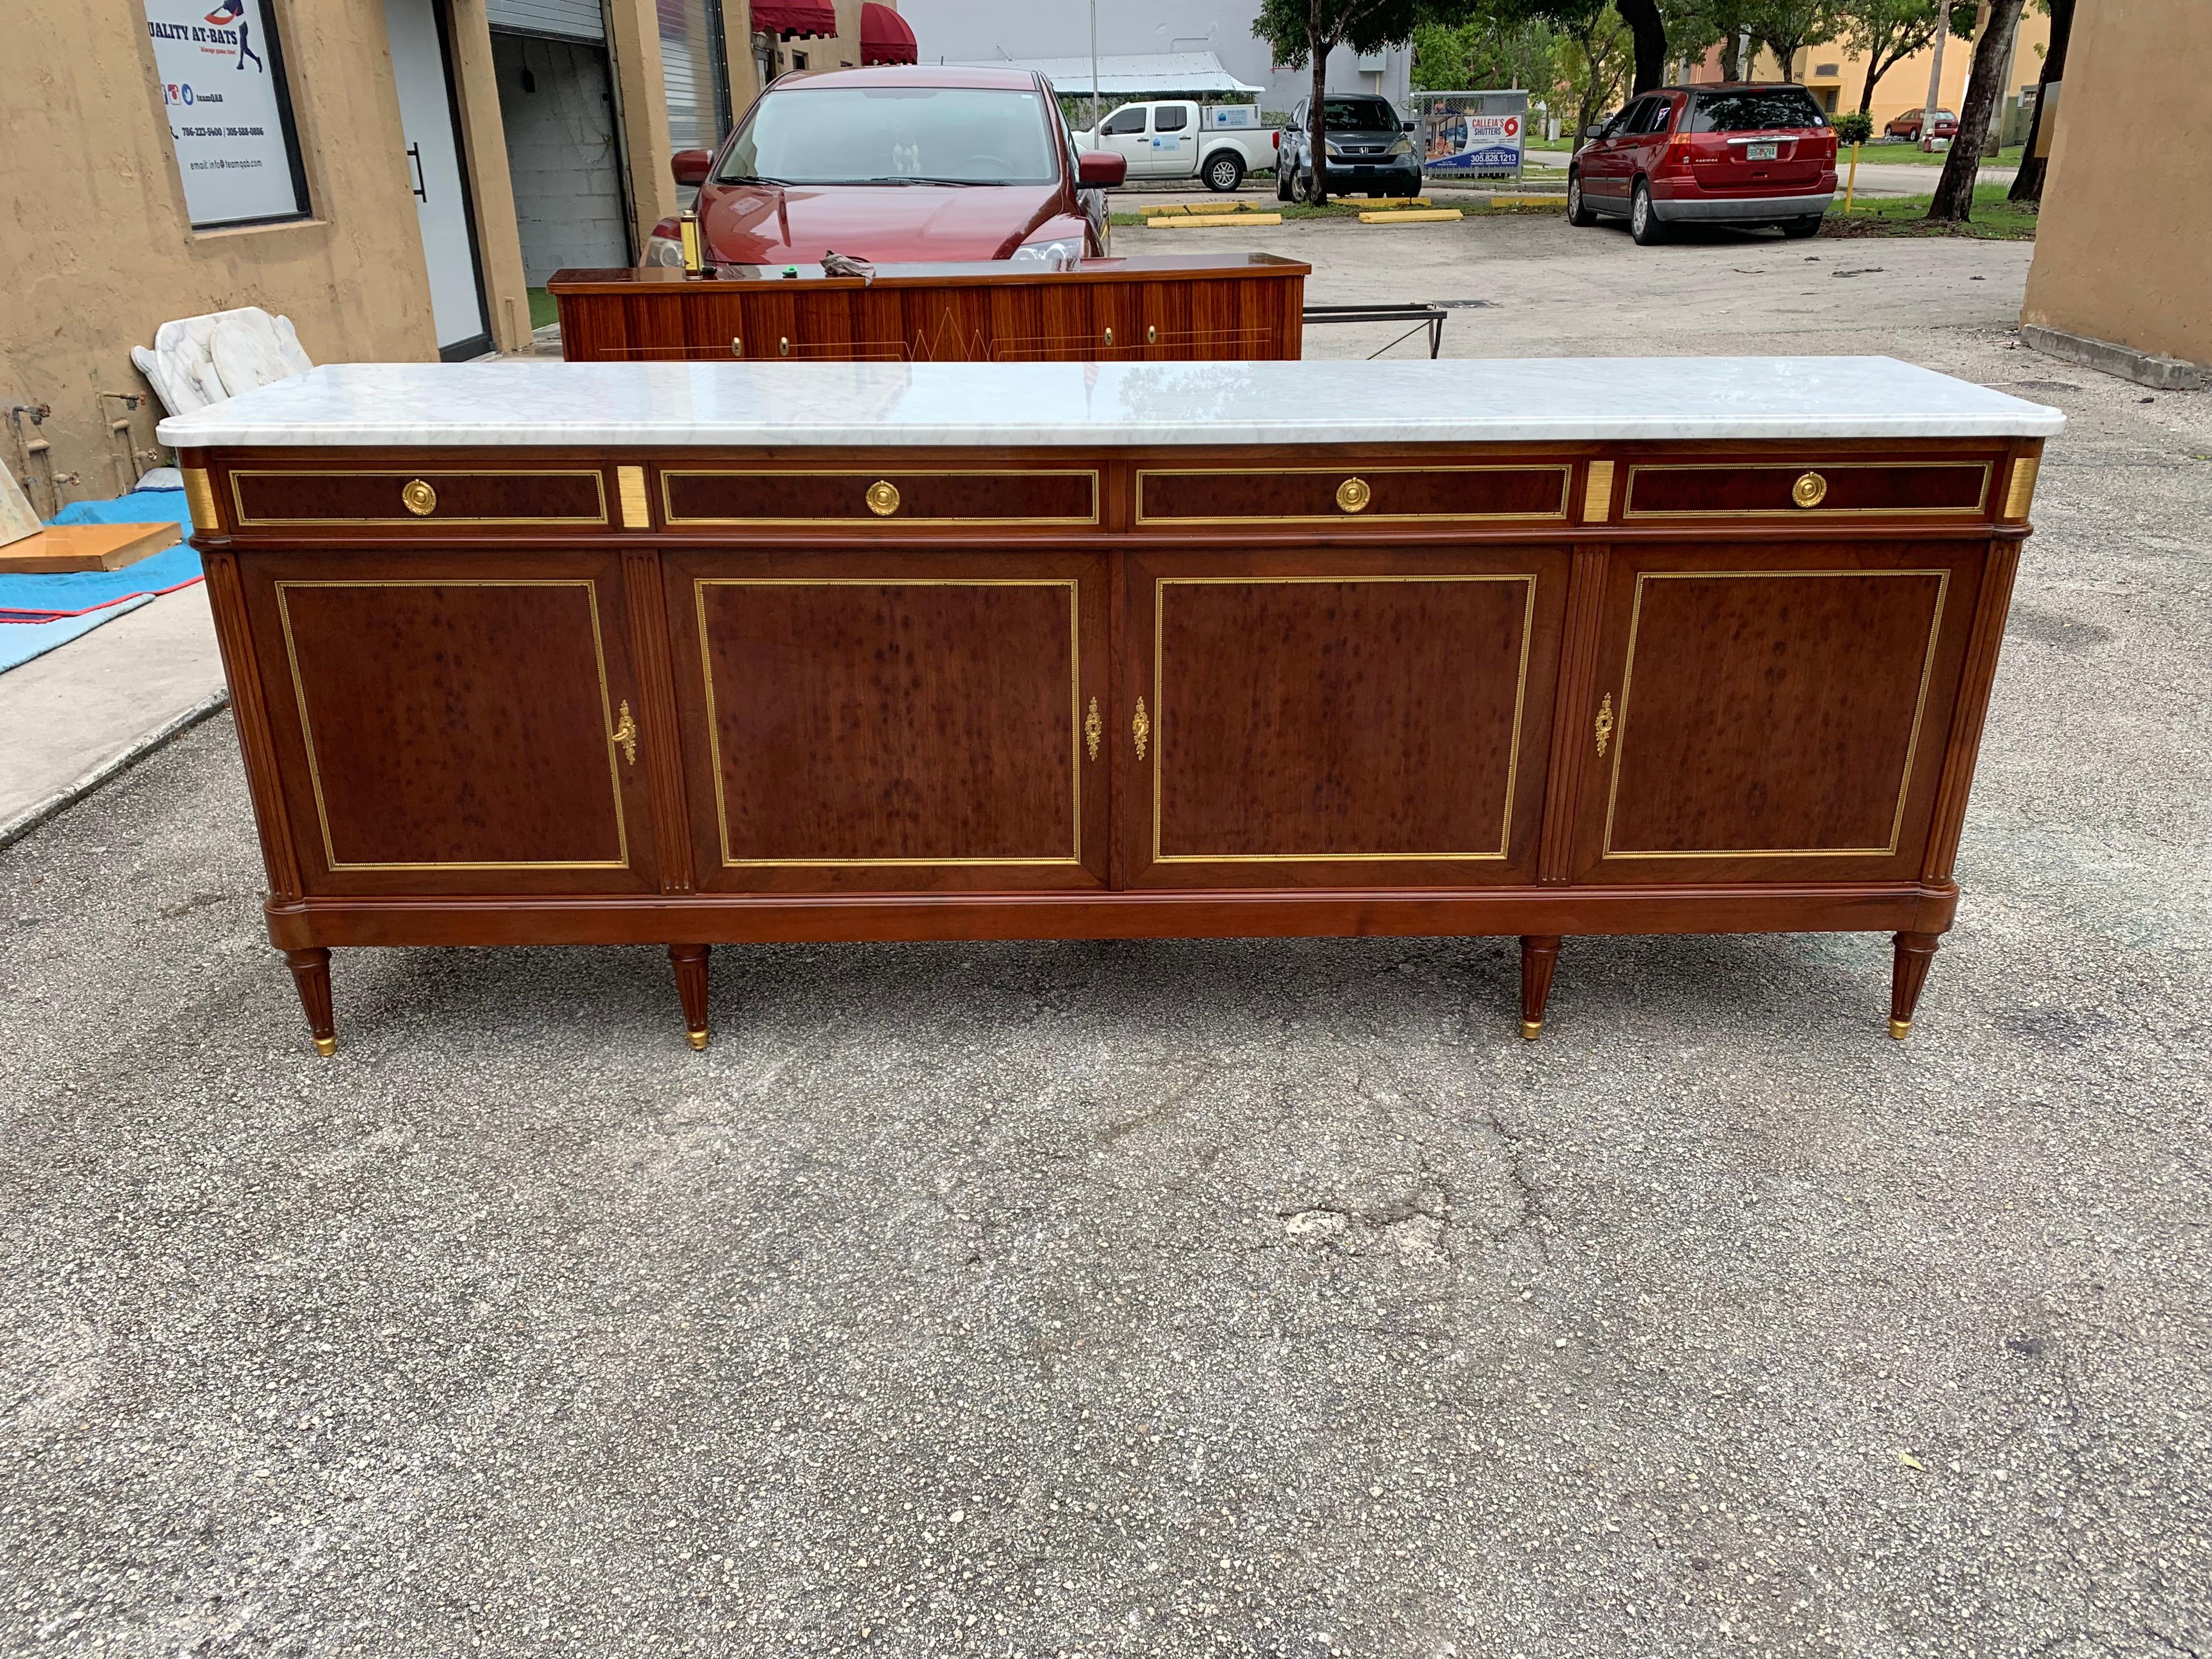 Long French antique Louis XVI style sideboard or buffet made of mahogany with a beautiful Carrara marble top, the mahogany wood has been finished with a French polished high luster inside and outside, the buffet has 4 doors and 4 drawers, with all 6